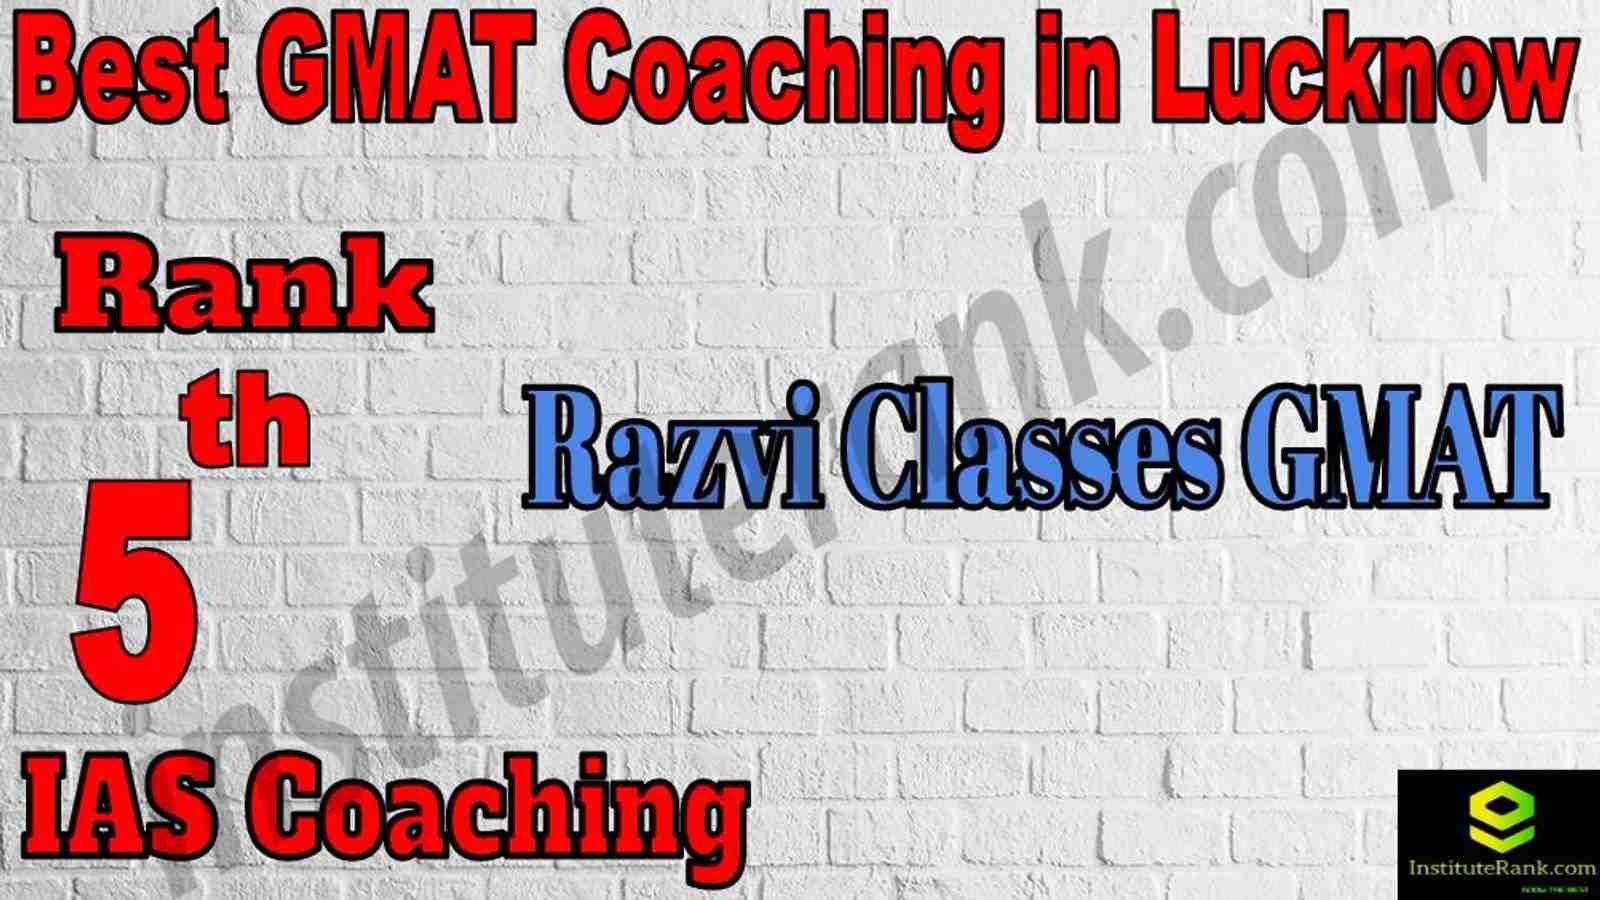 5th Best GMAT Coaching in Lucknow